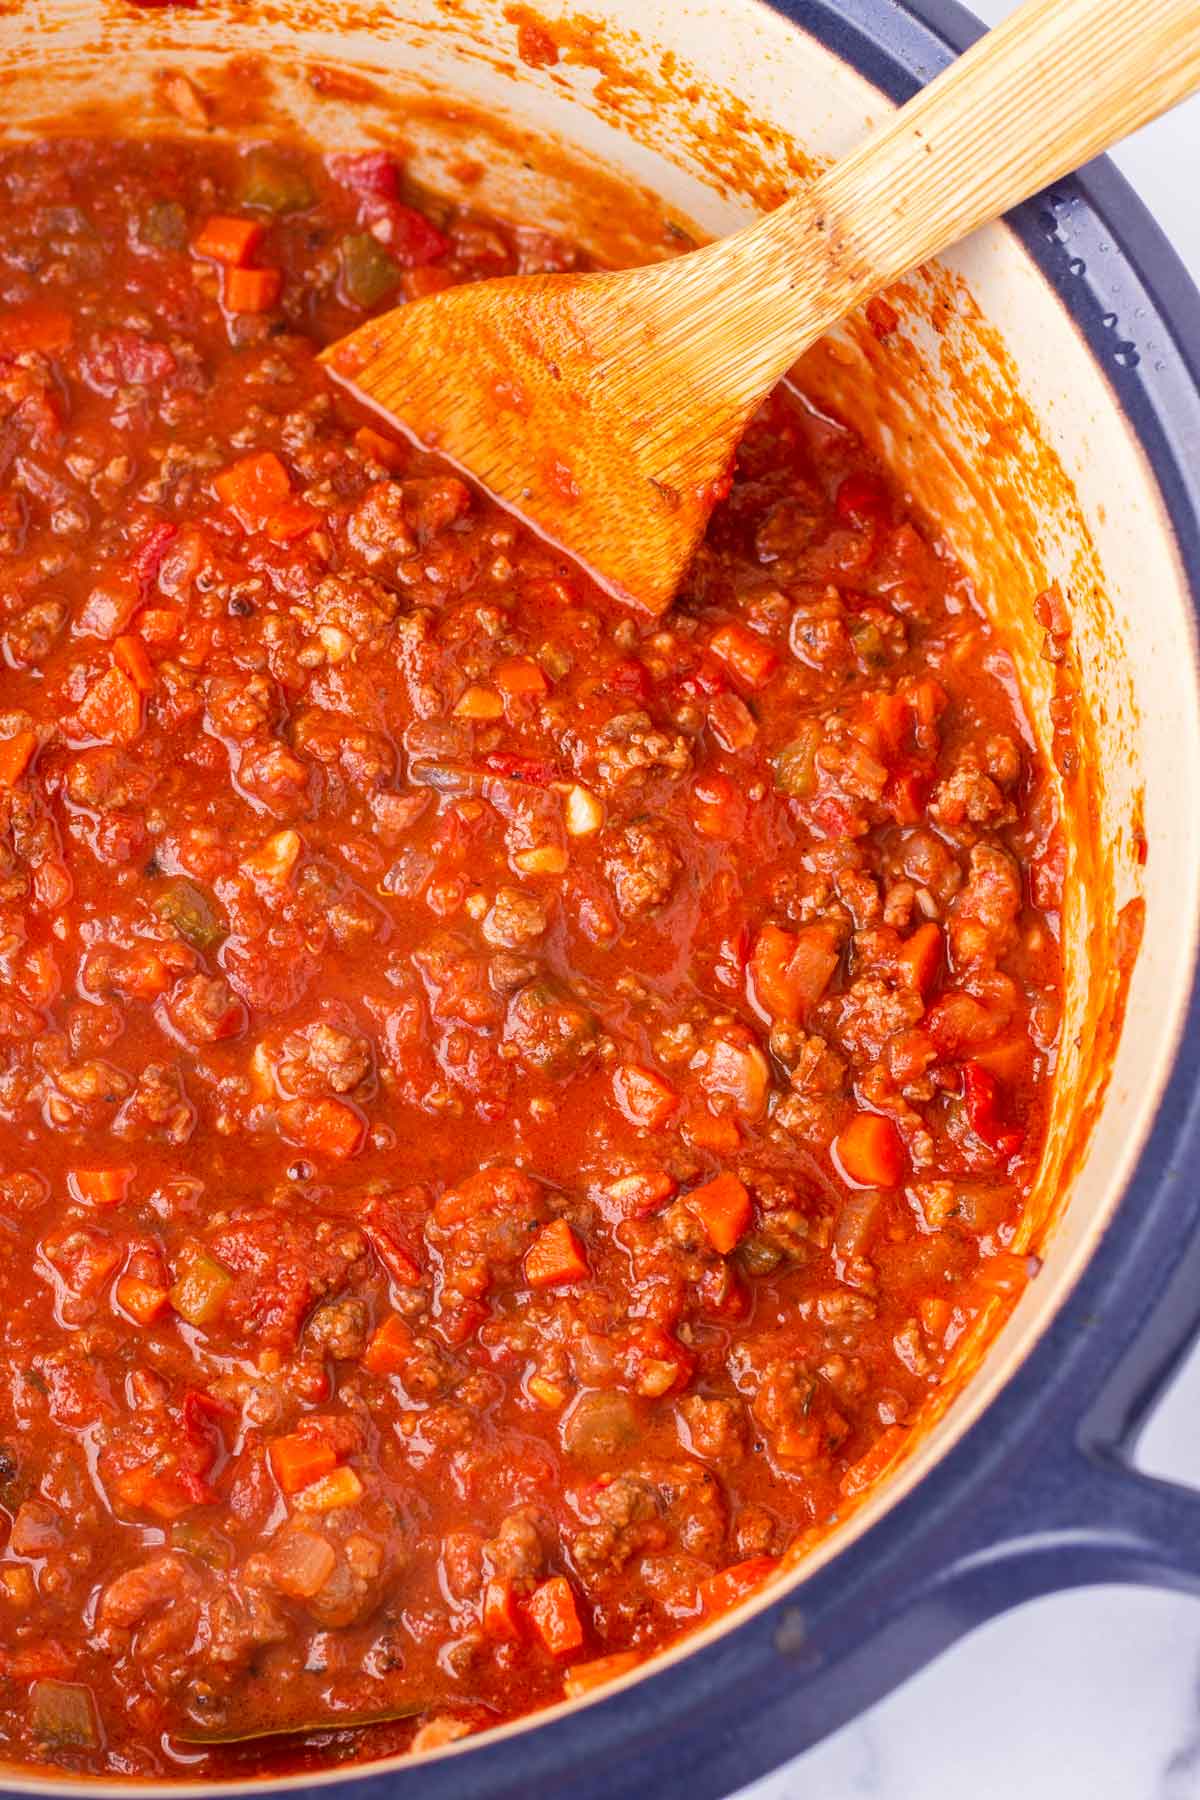 prepared tomato and meat sauce